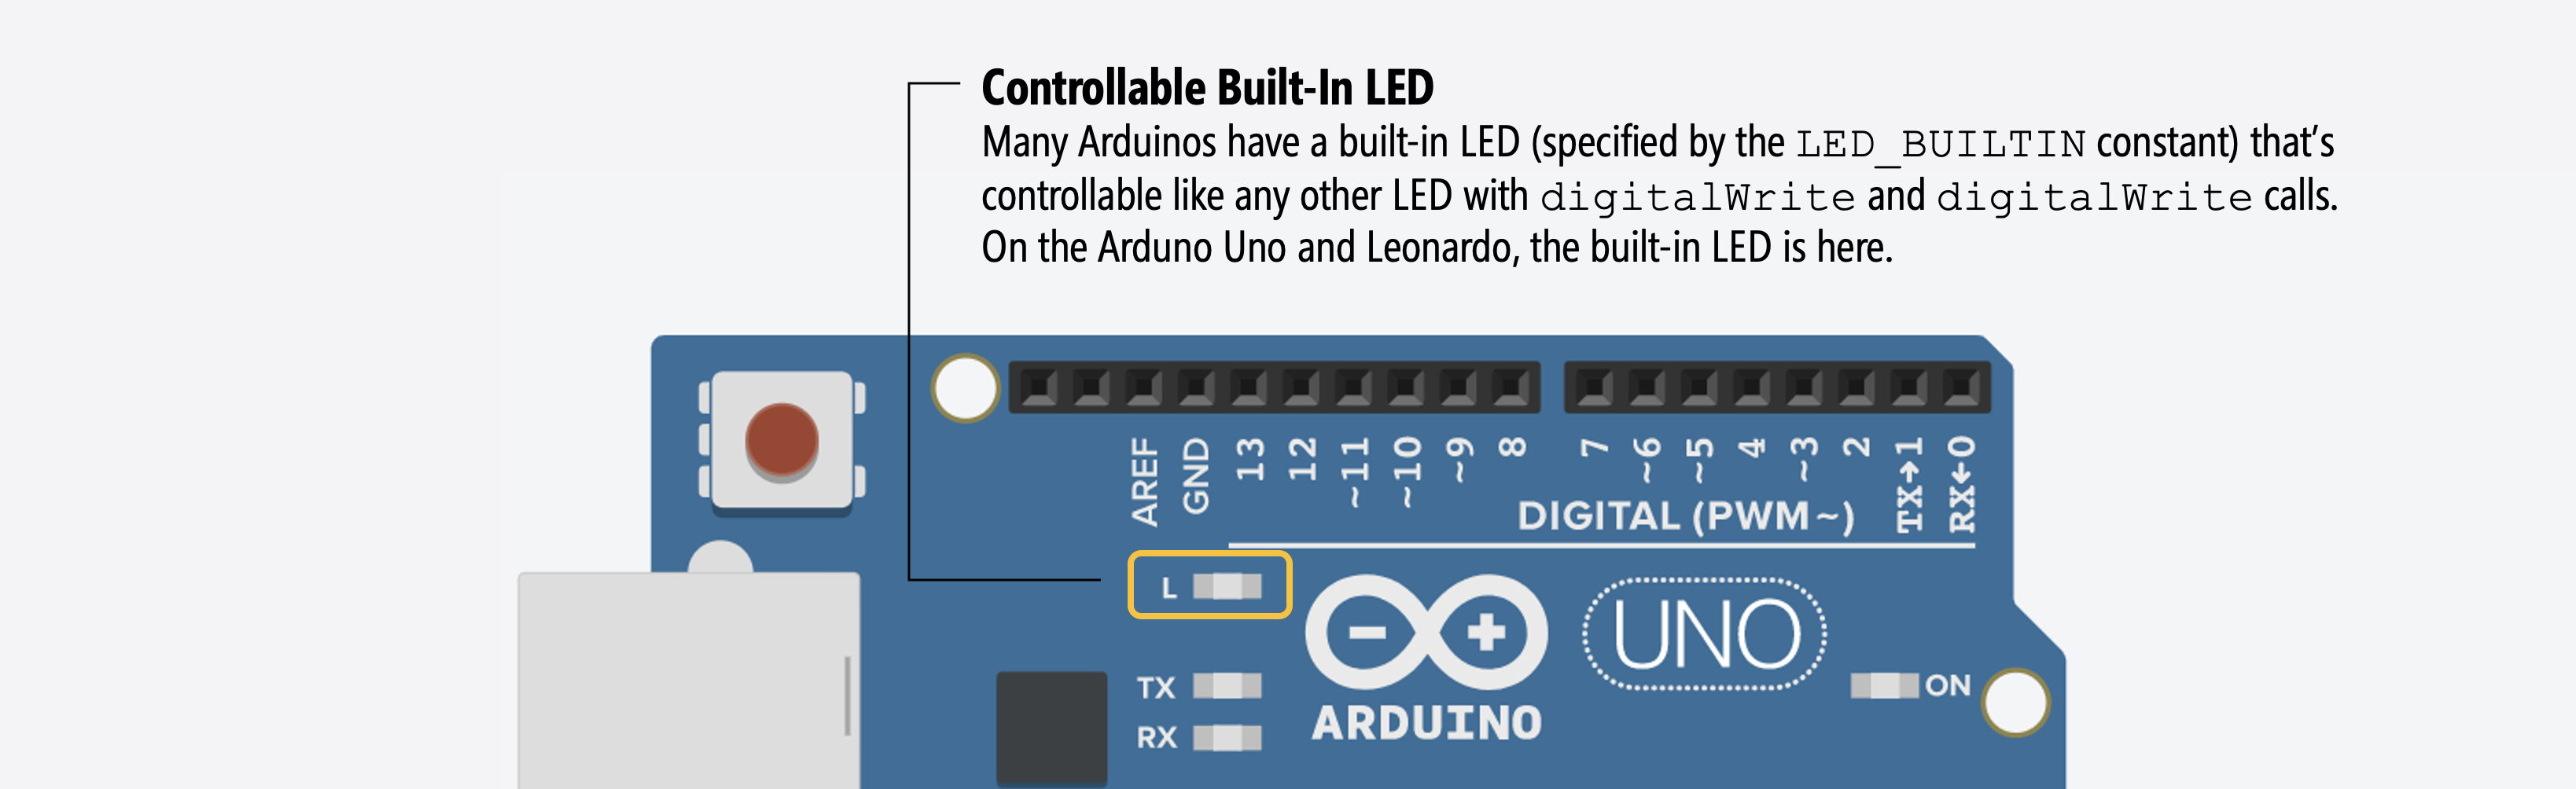 Image showing the location of the built-in controllable LED on the Arduino Uno